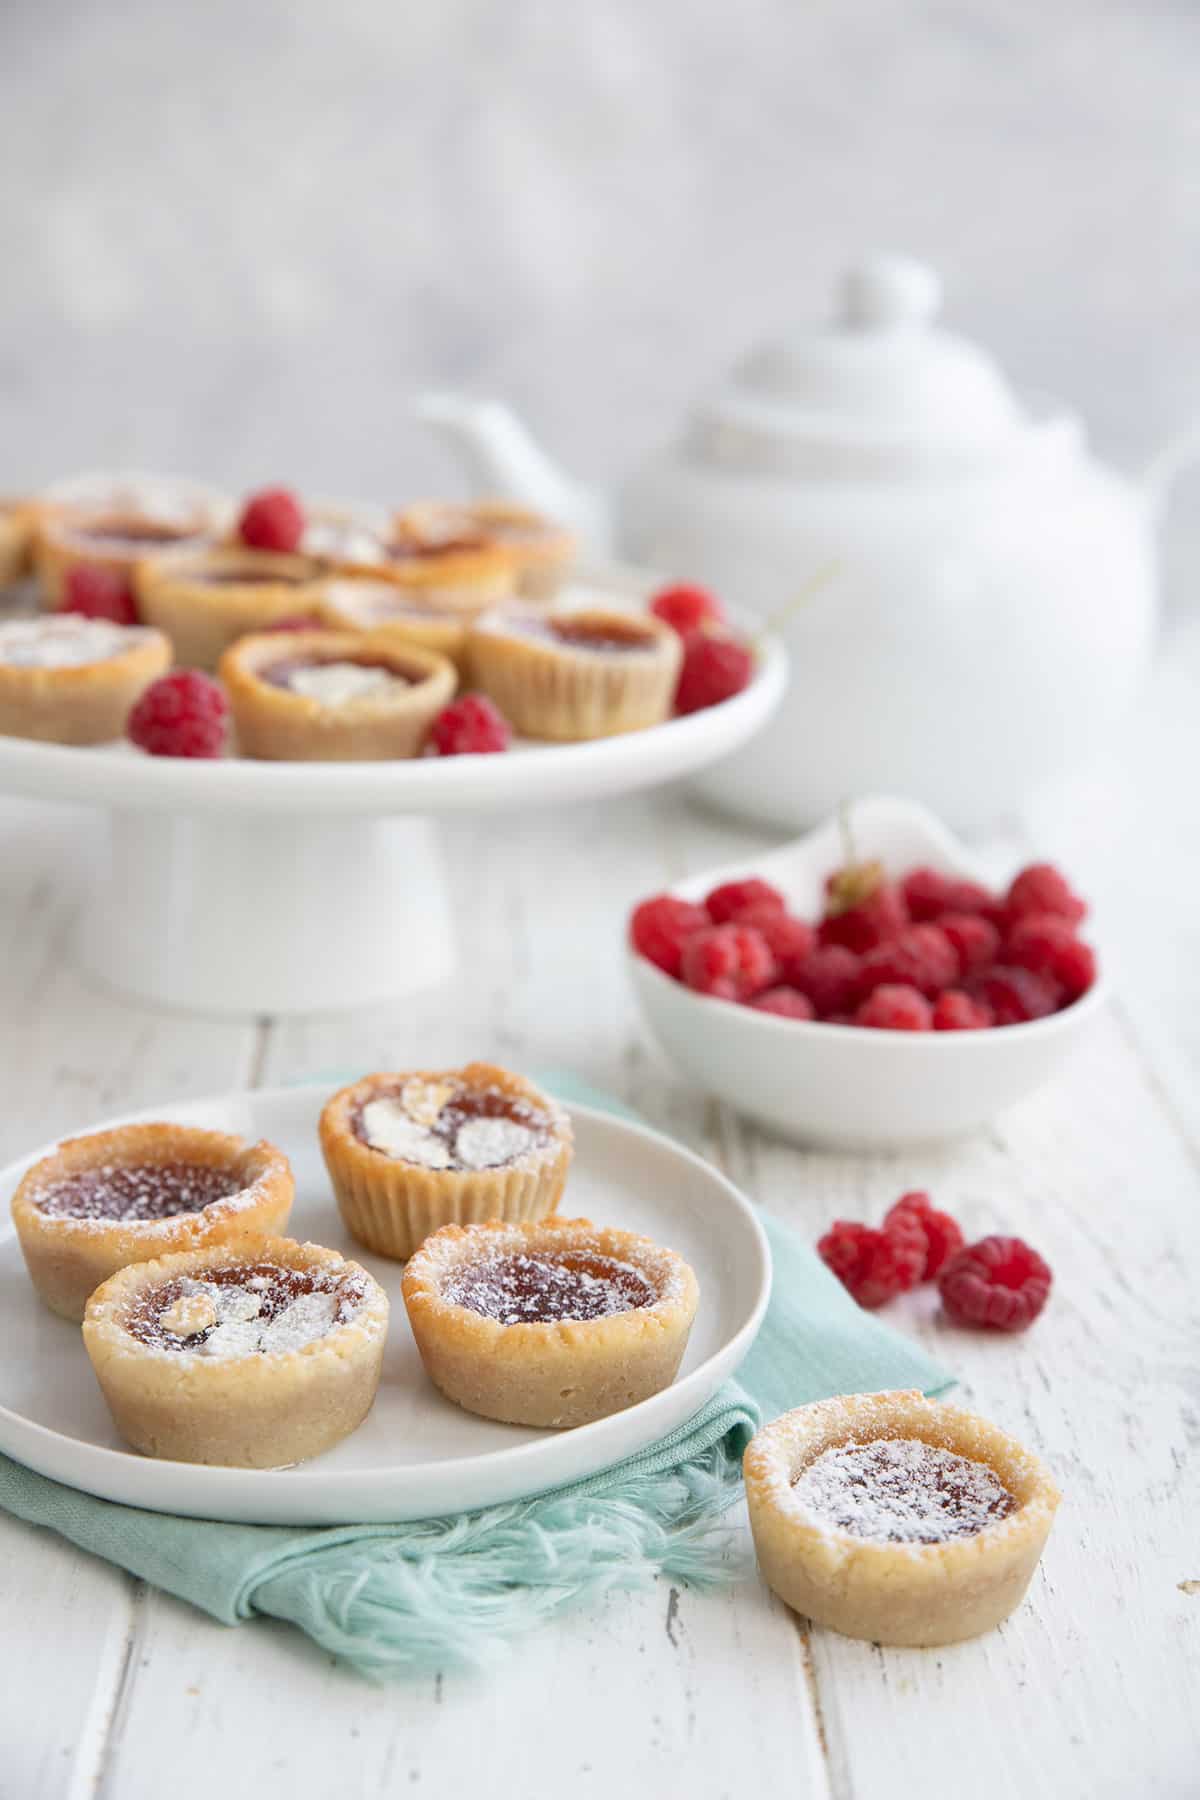 A white table set with a platter of jam tarts and a bowl of raspberries.